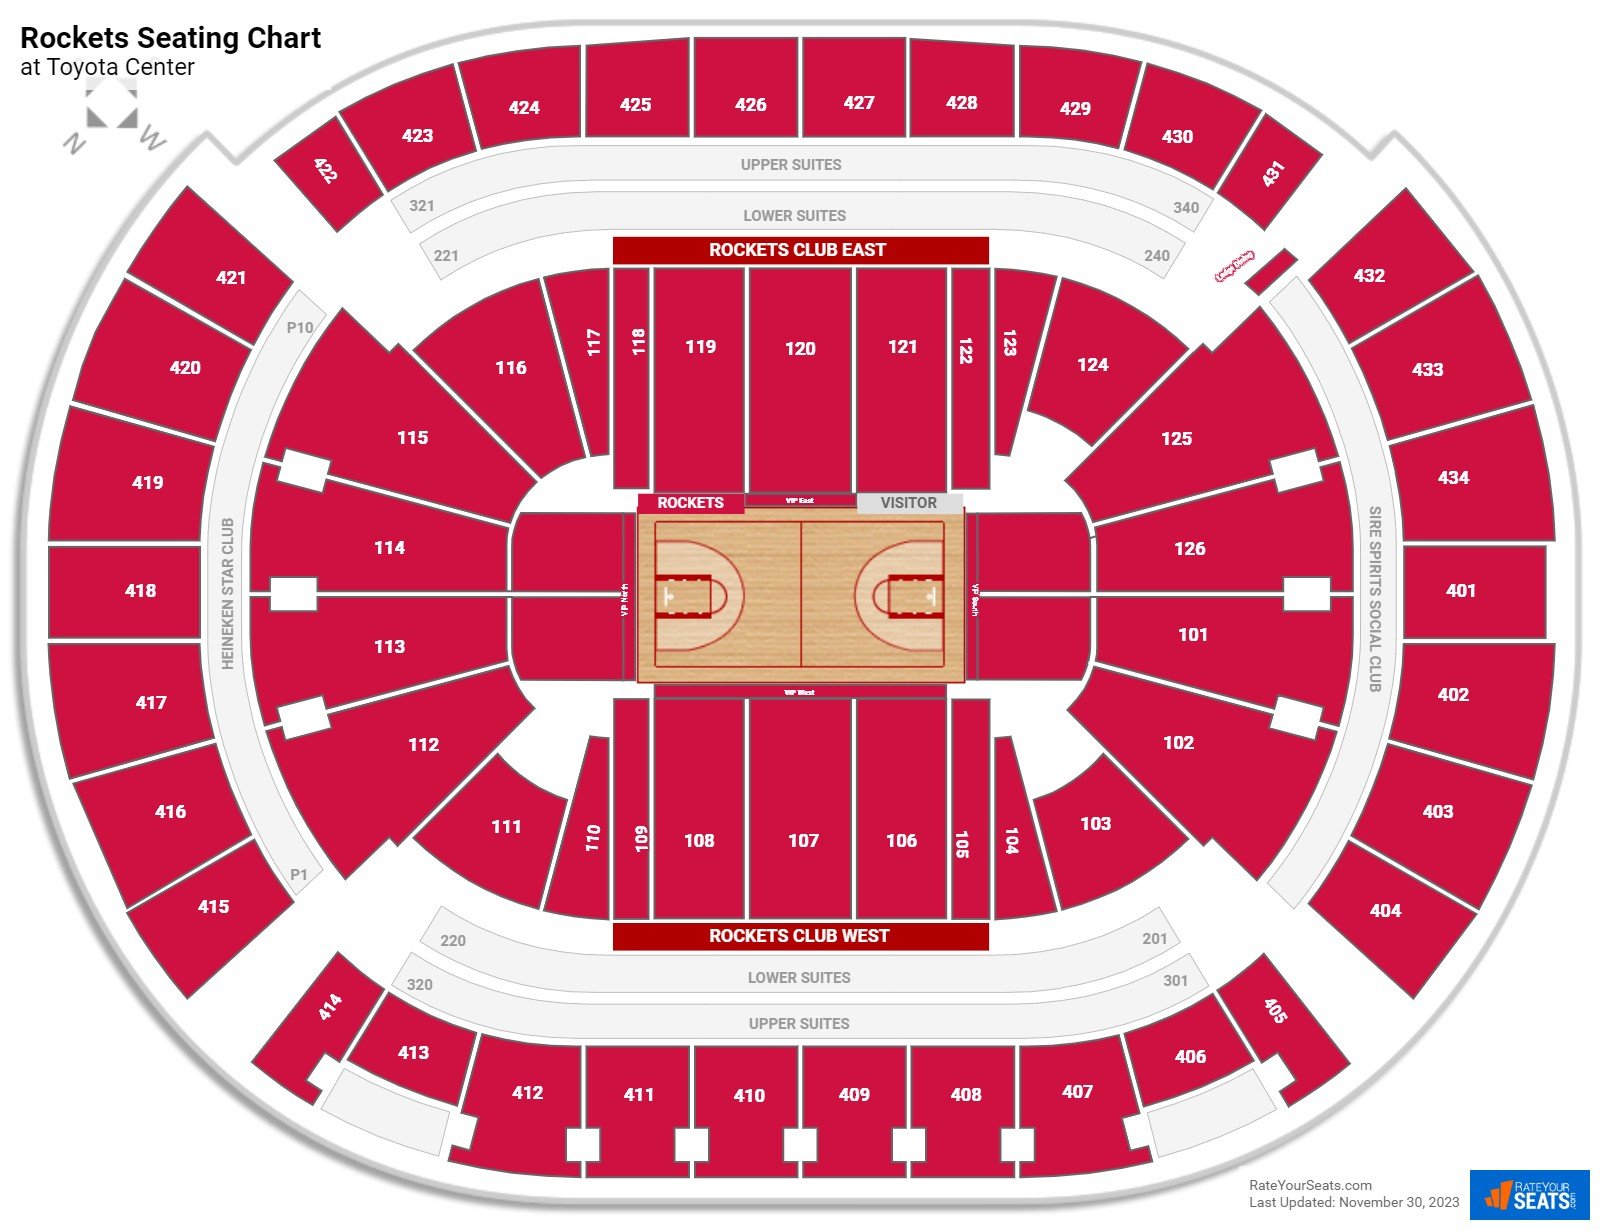 Houston Rockets Seating Chart at Toyota Center